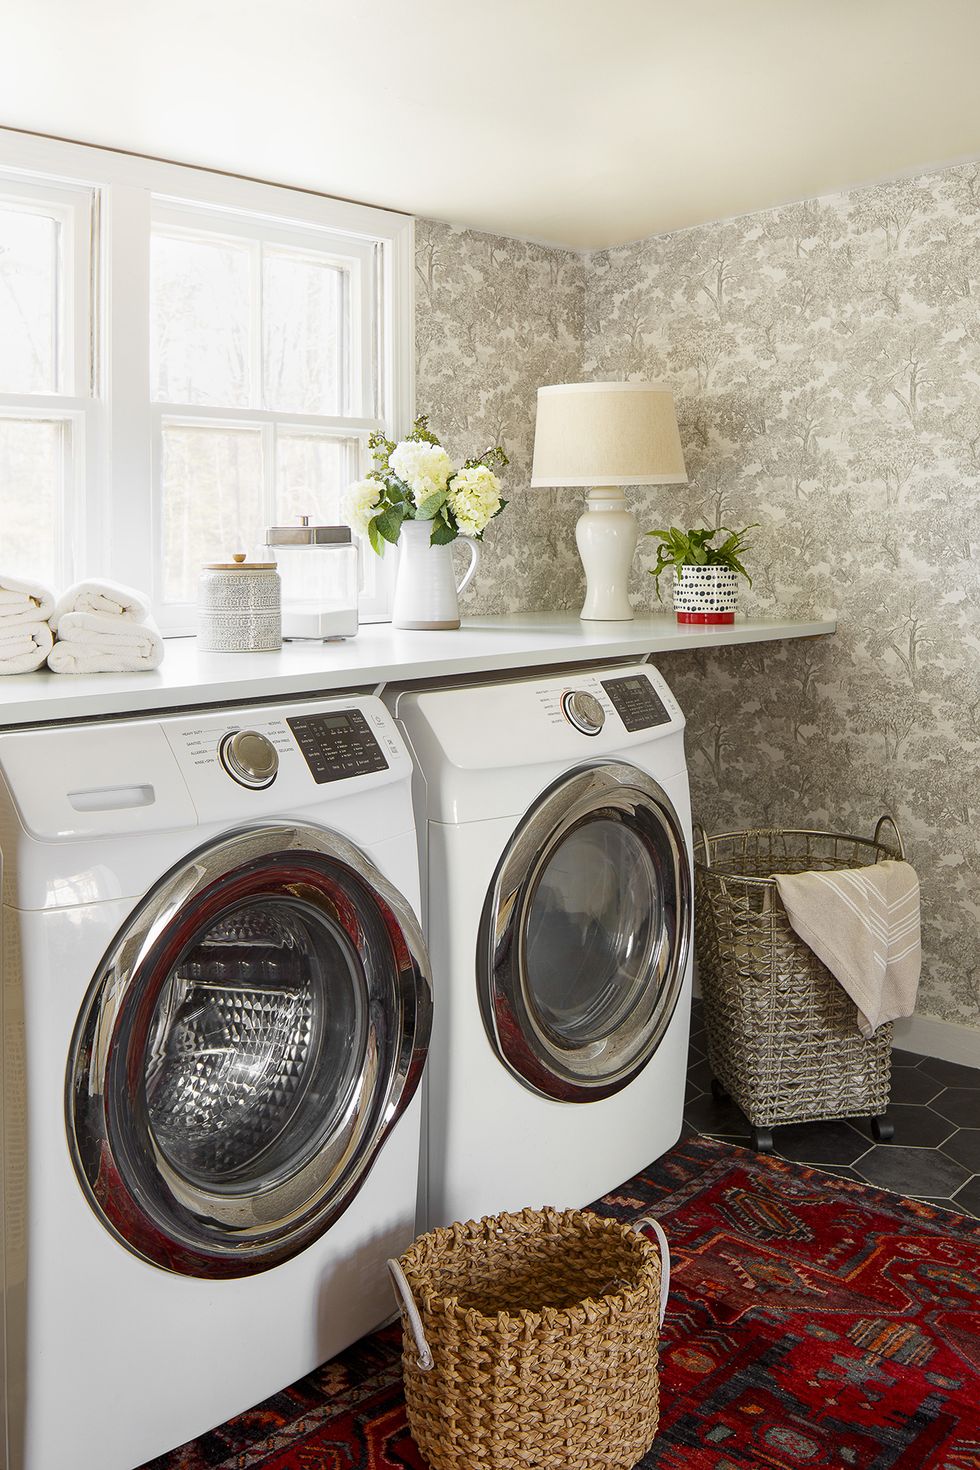 https://hips.hearstapps.com/hmg-prod/images/sarah-and-sons-interiors-laundry-room-01-photo-by-sarah-szwajkos-sarah-szwajkos-sarah-szwajkos-651338a24d9ea.jpg?crop=1xw:1xh;center,top&resize=980:*